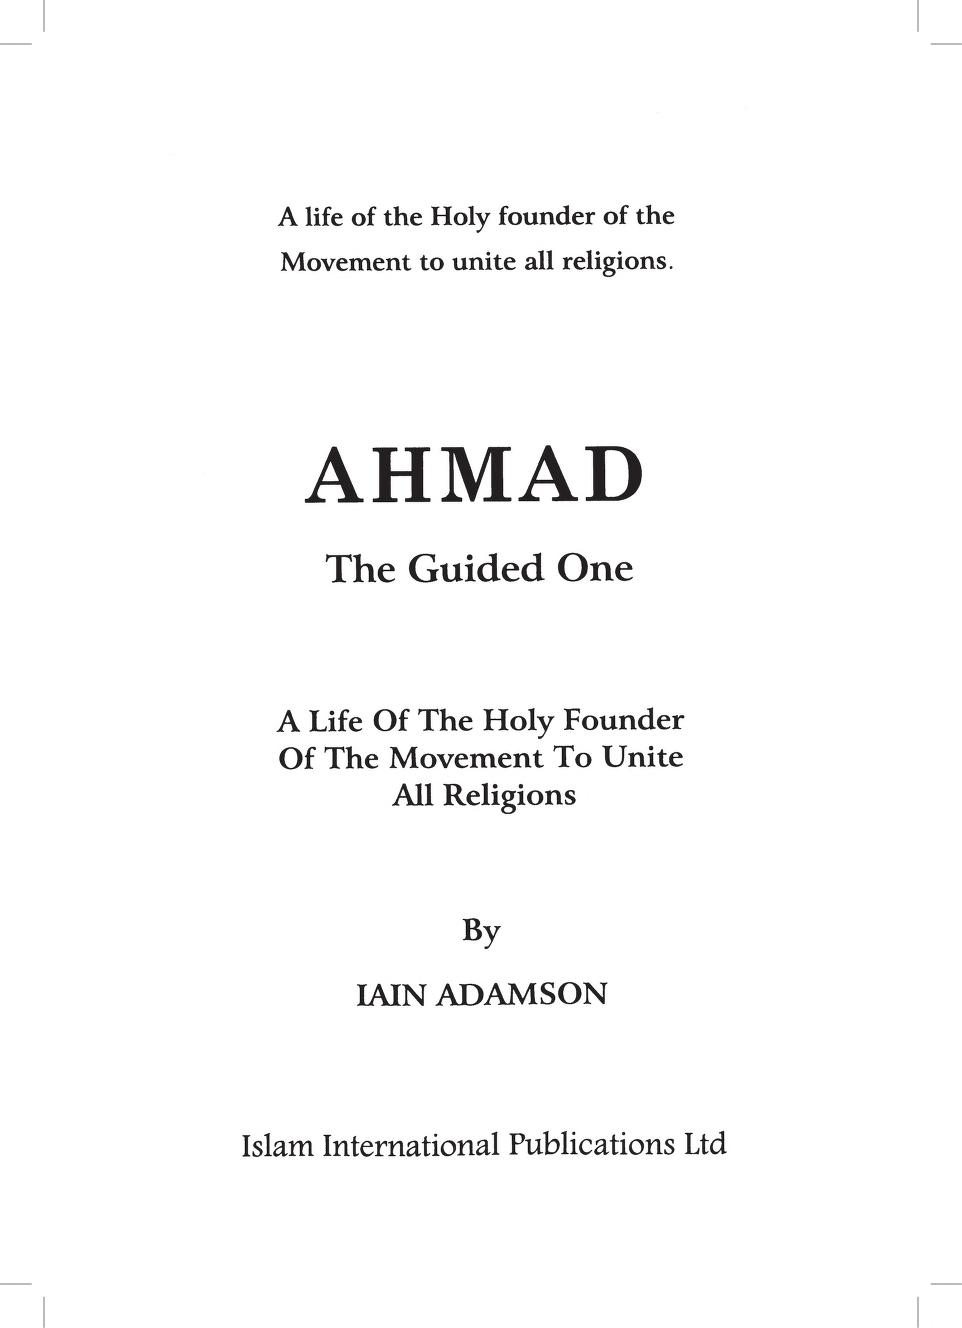 Ahmad The Guided One By Lain Adamson